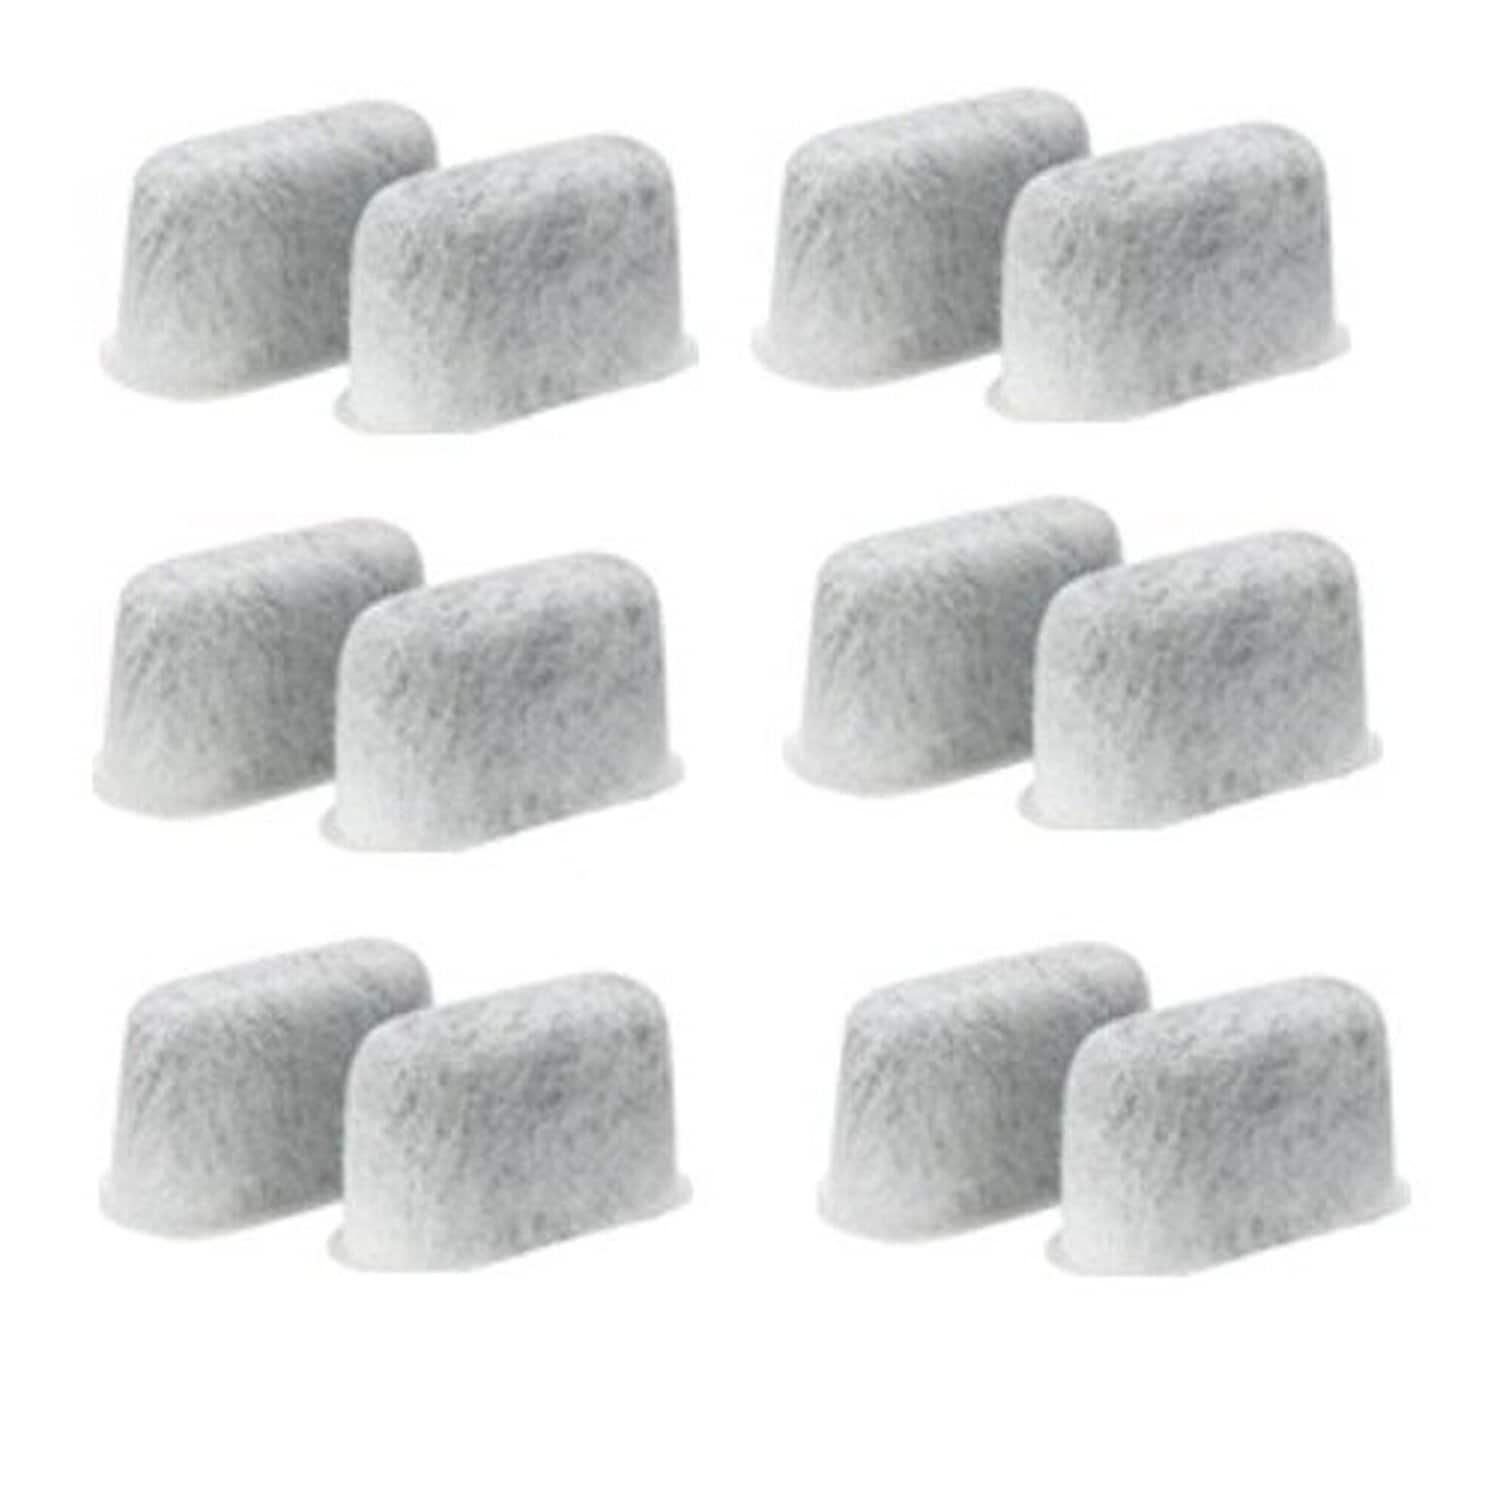 Blendin 12-Pack Replacement Charcoal Water Filters for Cuisinart Coffee Machines